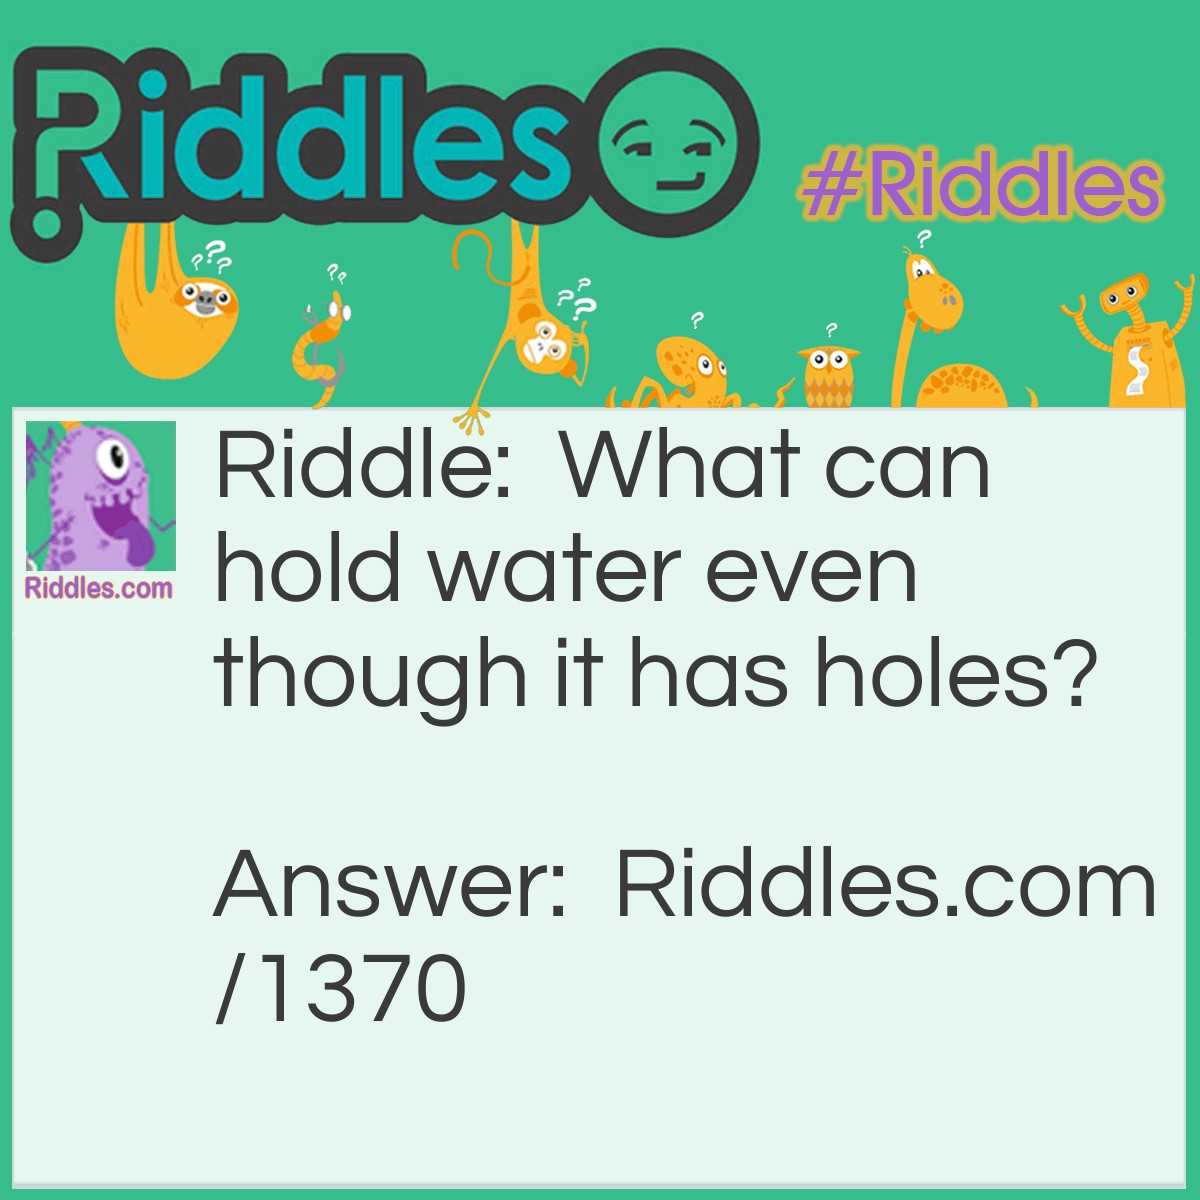 Riddle: What can hold water even though it has holes? Answer: A sponge.